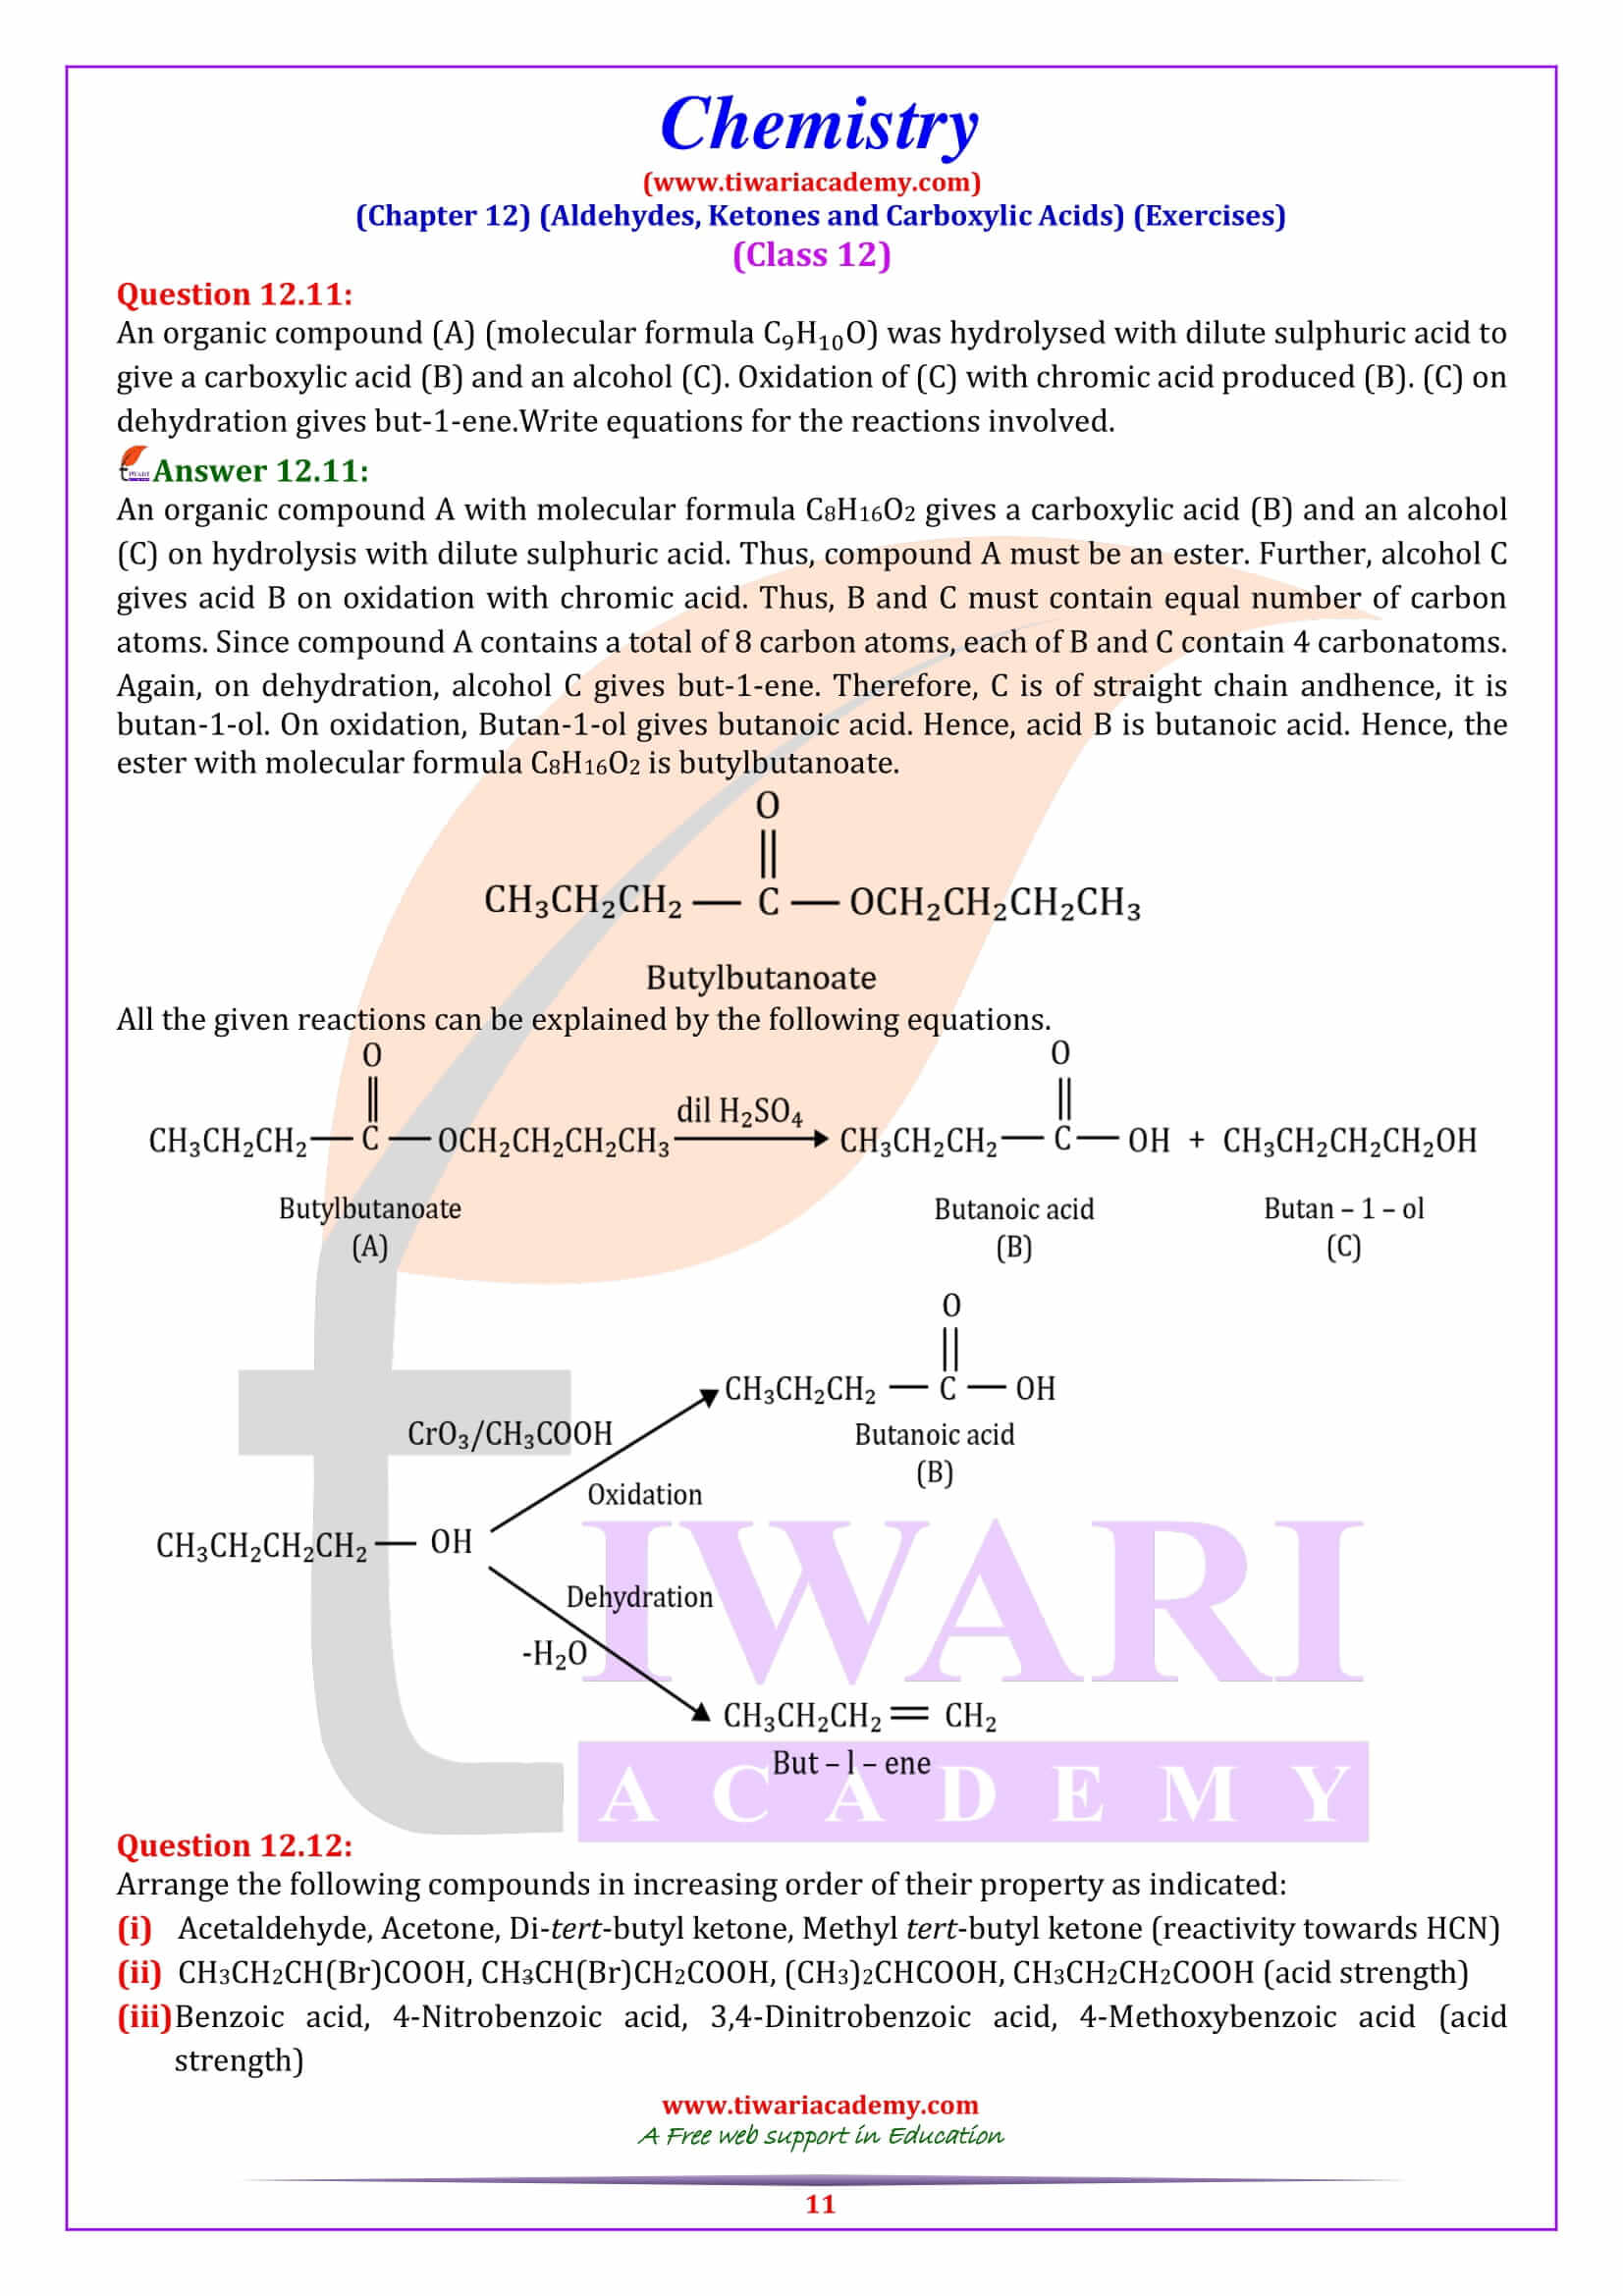 Class 12 Chemistry Chapter 12